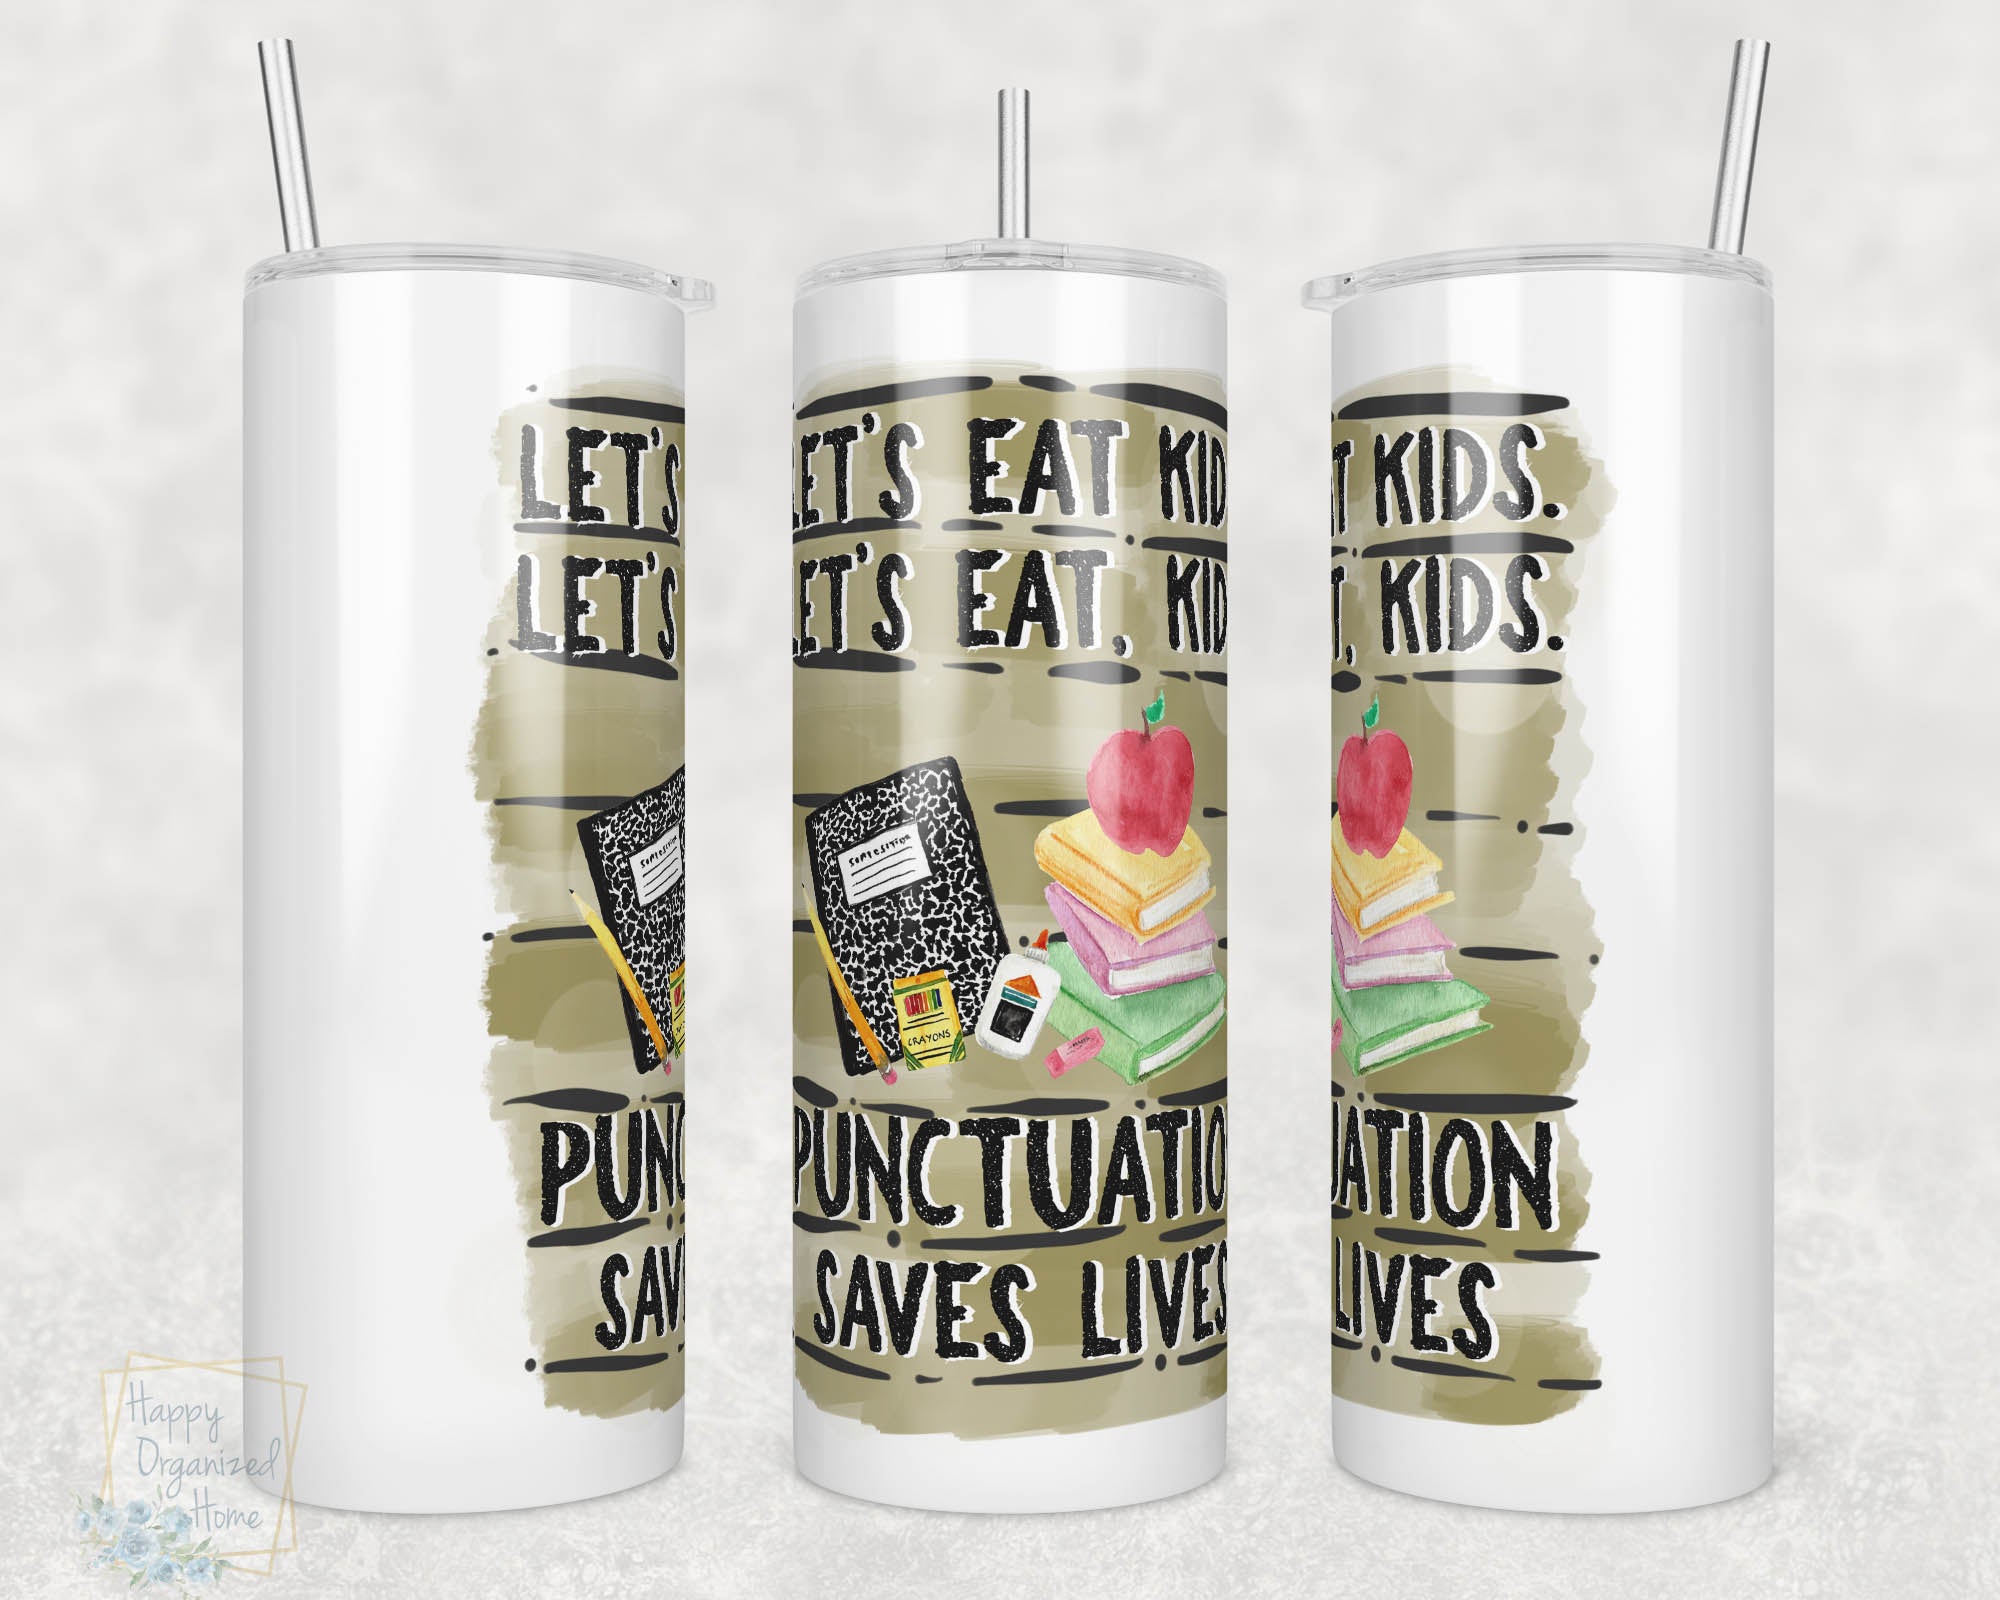 Let's Eat Kids. Let's Eat, Kids. Punctuation Saves Lives  20oz Skinny Insulated tumbler with metal straw